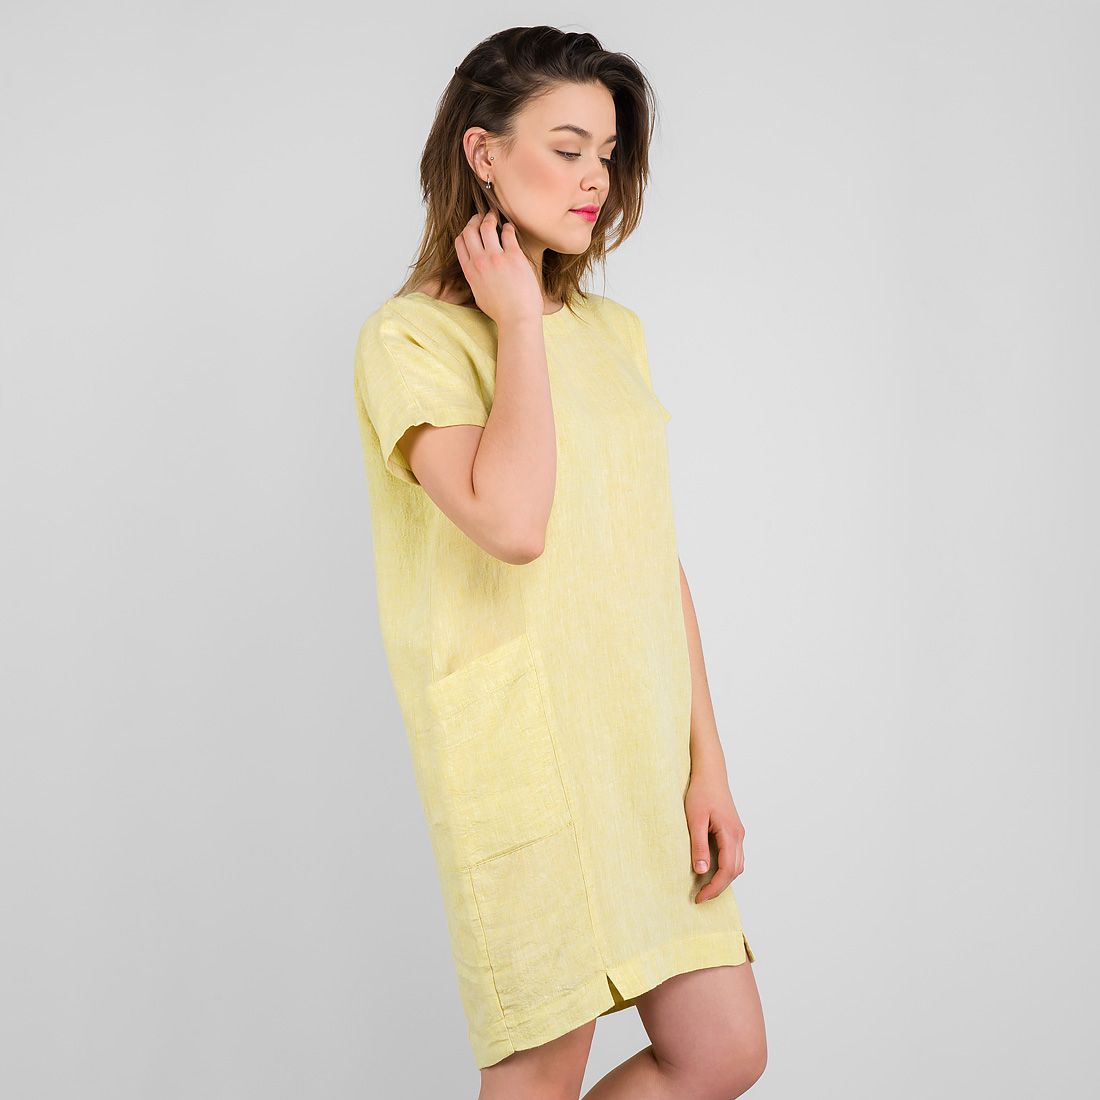 Short yellow linen dress, short sleeves, with pockets. Manufacturer: AB “Siulas”, Lithuania